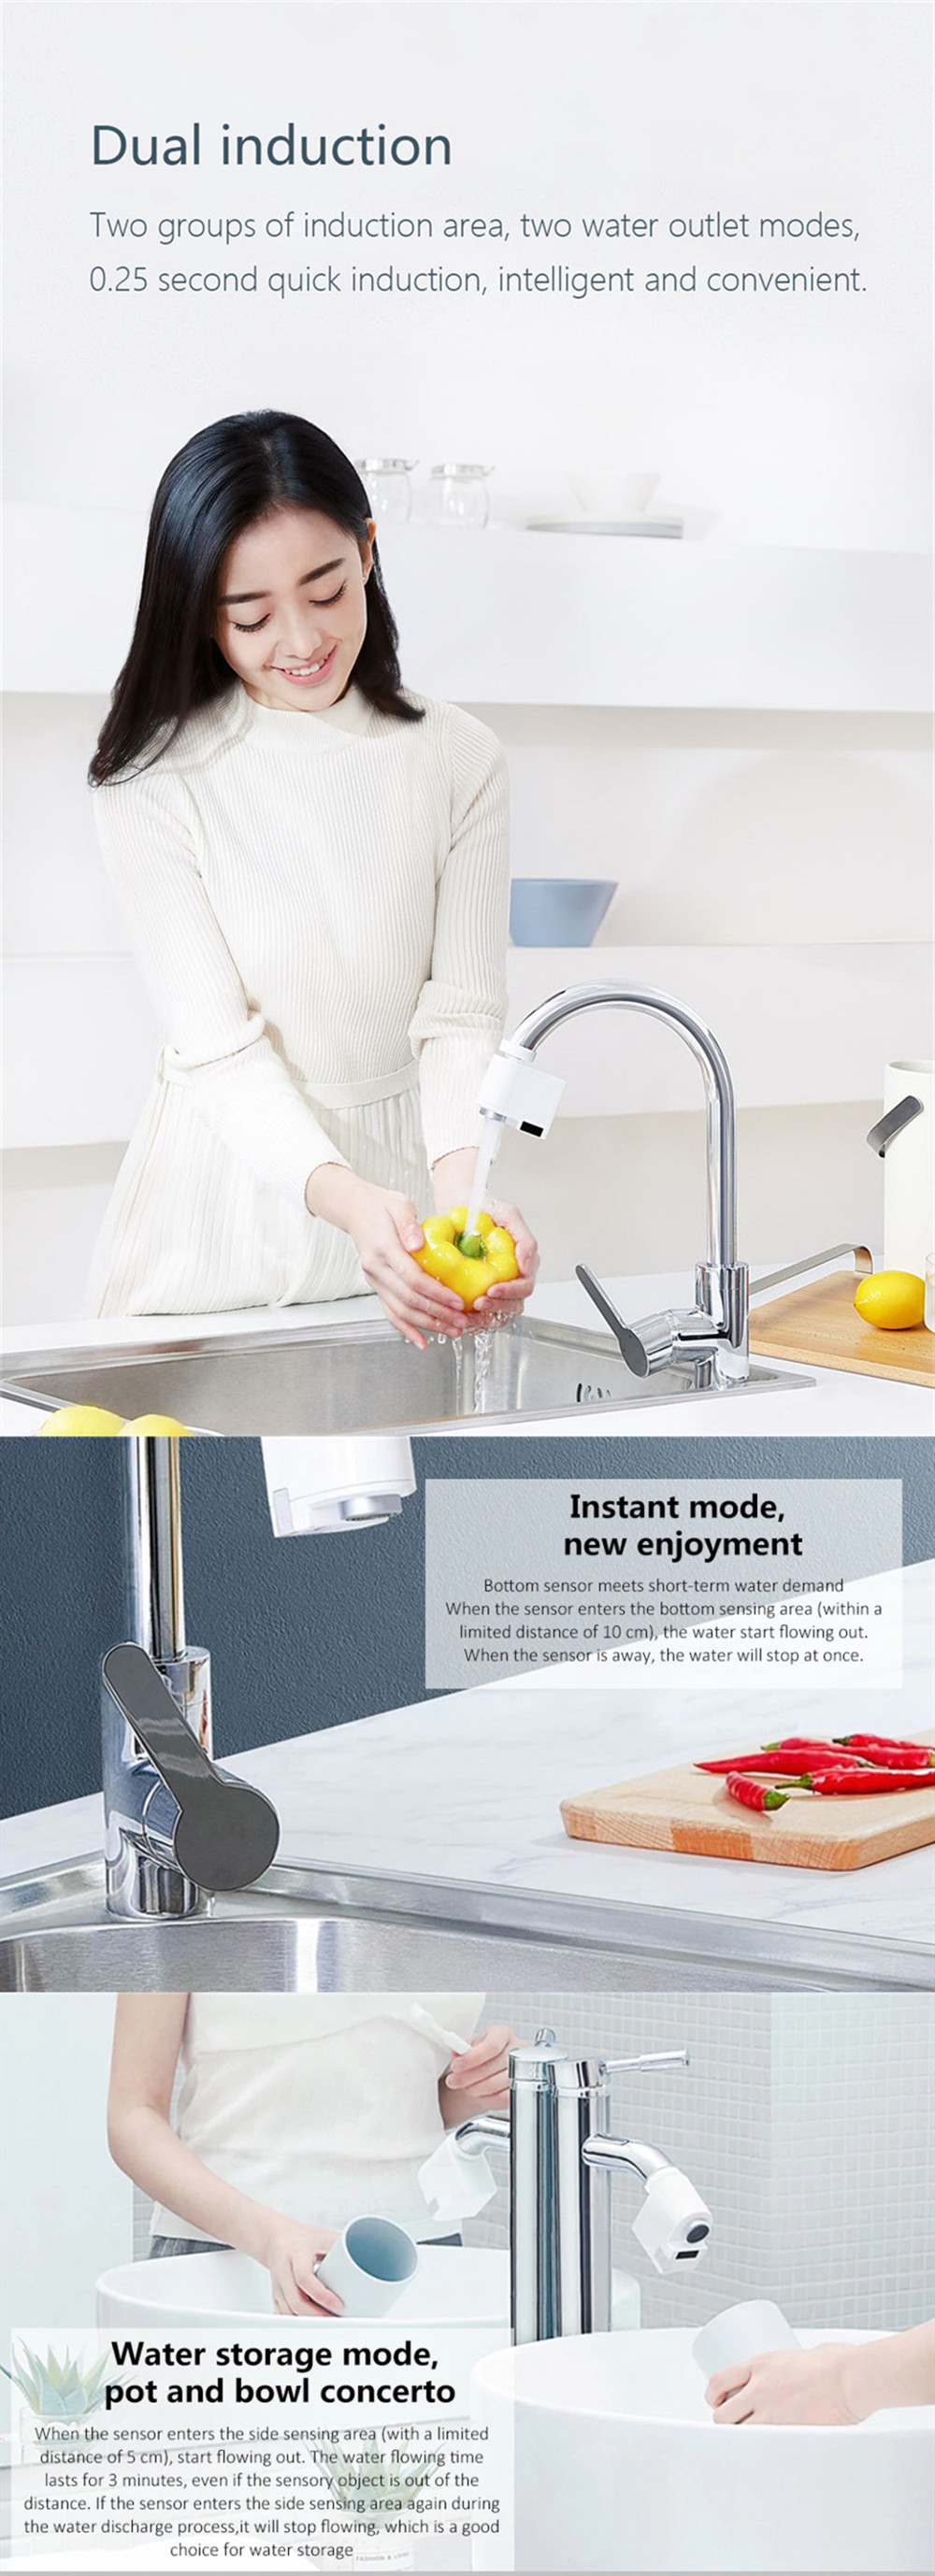 Xiaomi ZAJIA Automatic Sense Infrared Induction Water Saving Device For Kitchen Bathroom Sink Faucet 